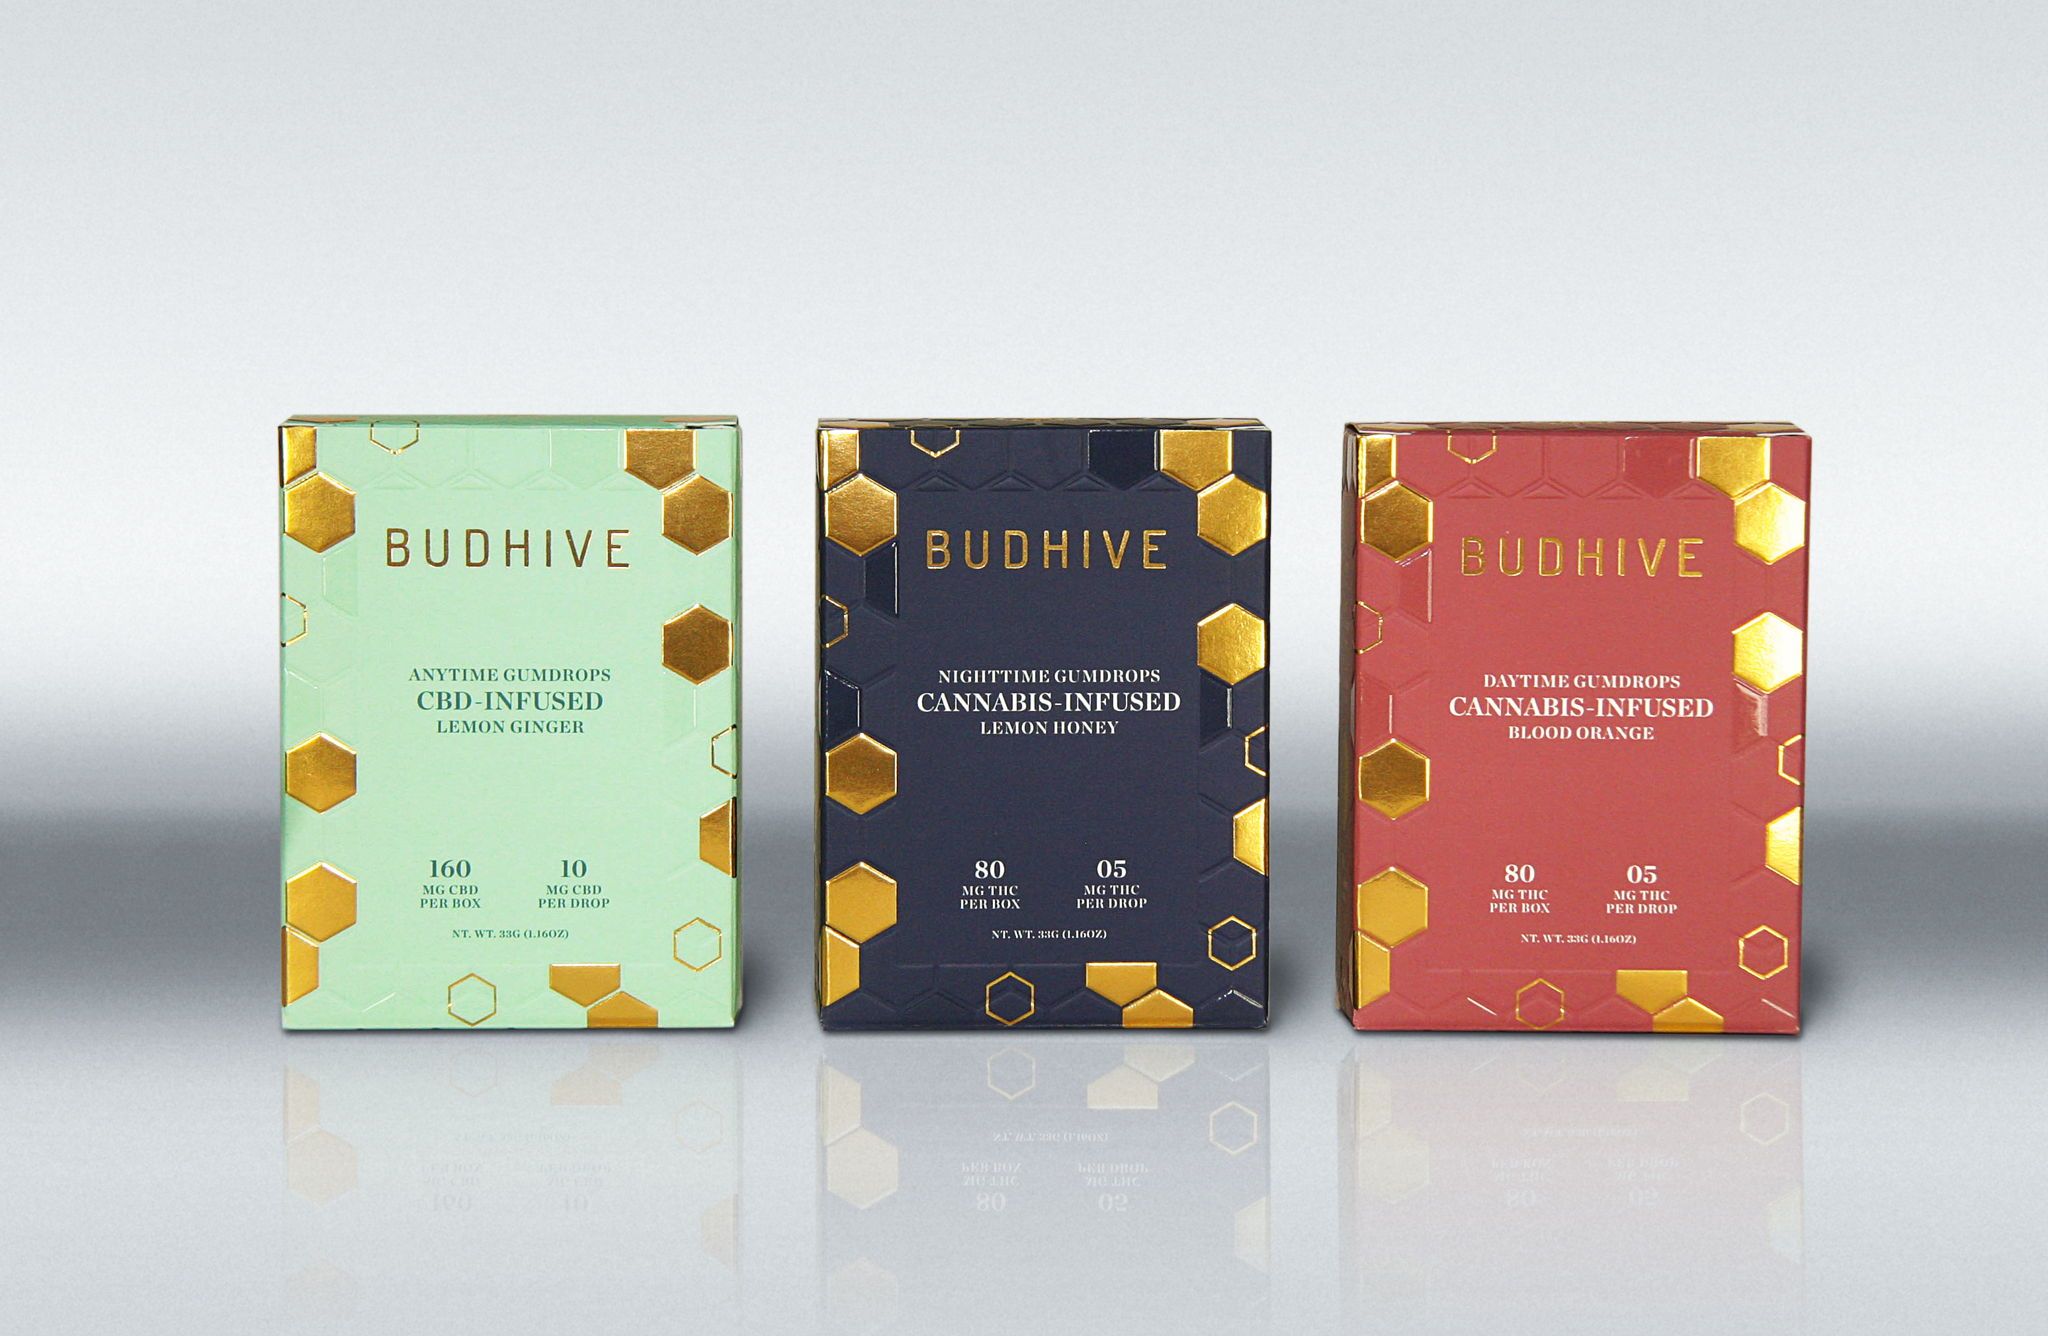 12 Beautiful Cannabis Edible Packaging Designs on Inspirationde